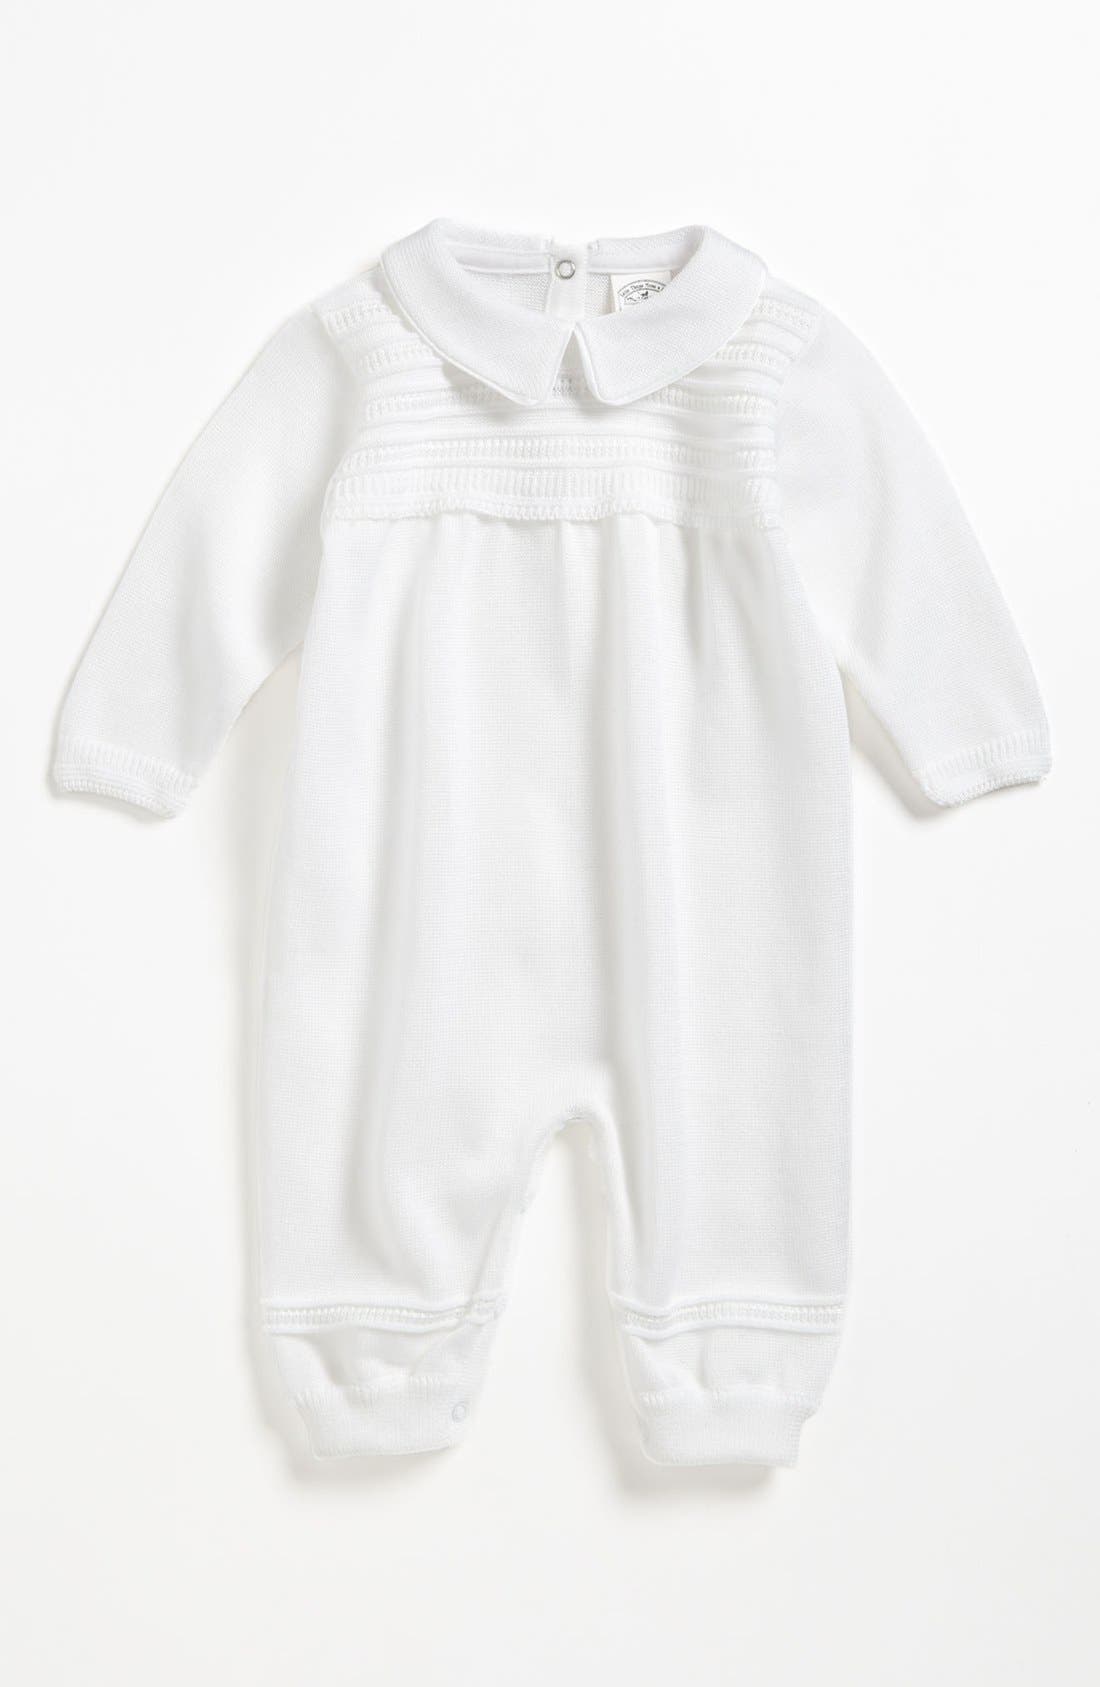 nordstrom christening outfit boy